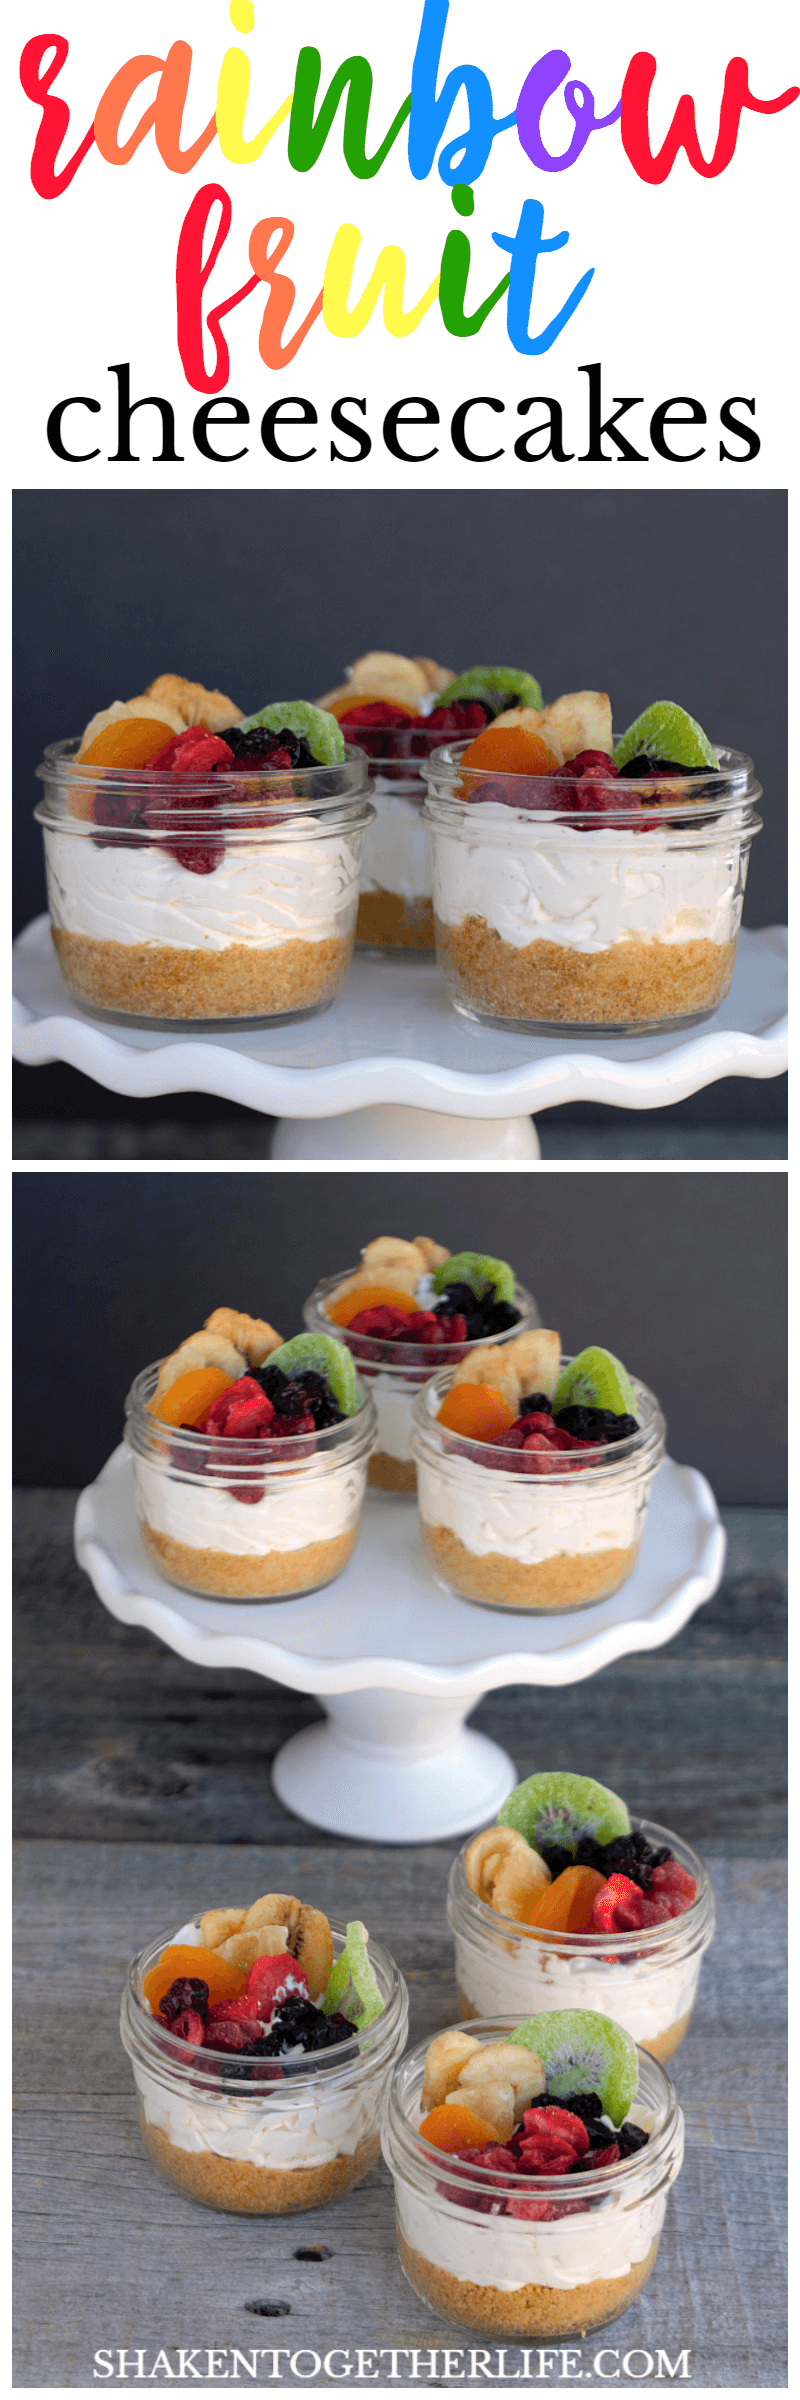 Rainbow Fruit Cheesecakes in a Jar - this is my favorite no bake cheesecake recipe with a homemade graham cracker crust and topped with gorgeous rainbow fruit!